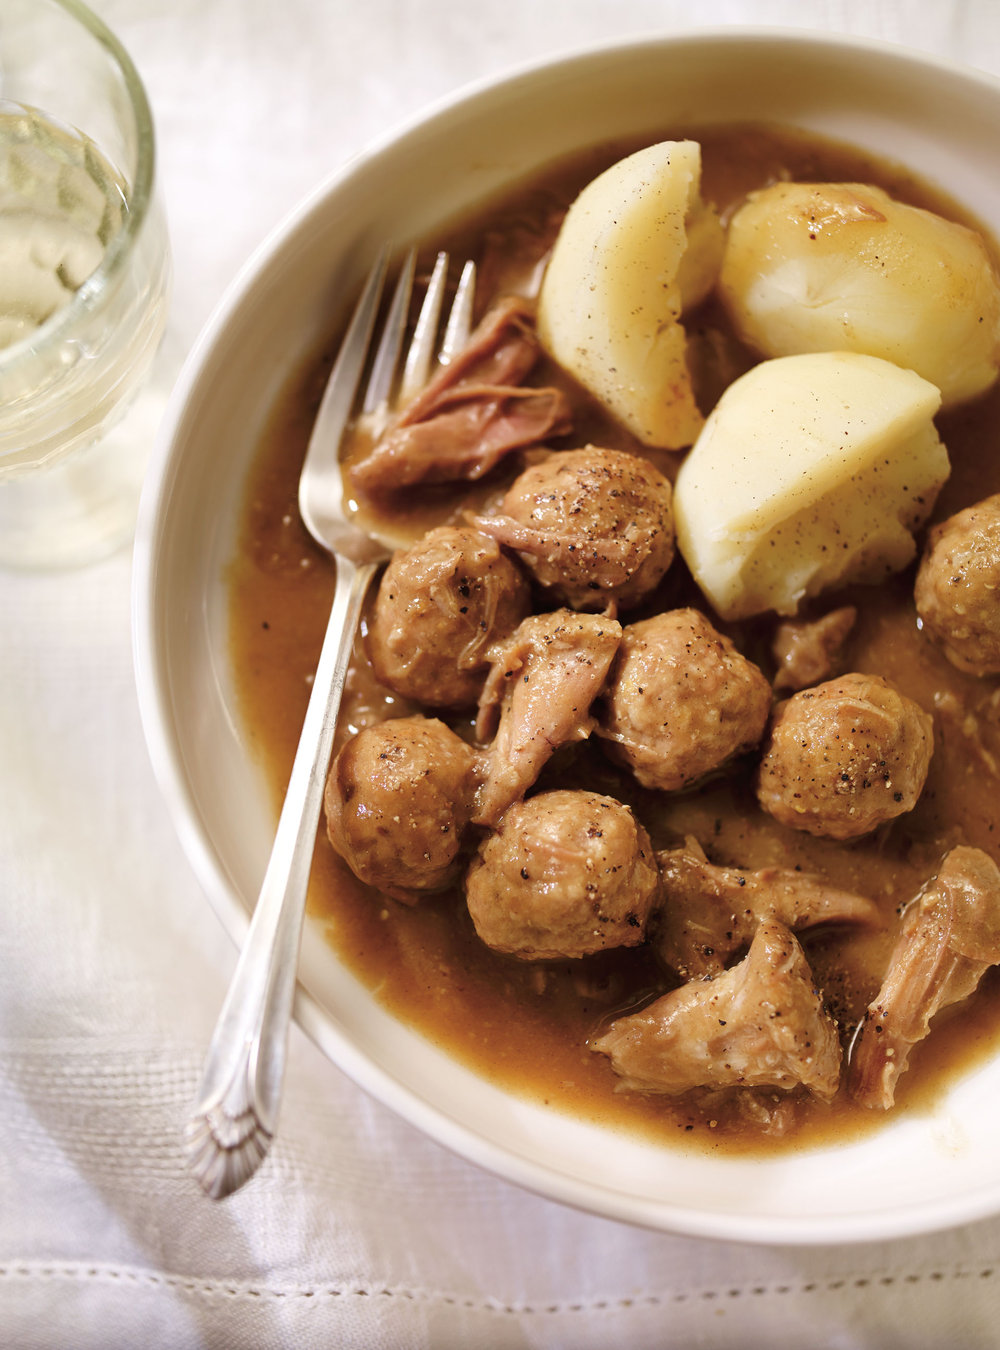 Meatball and Pigs’ Feet Stew